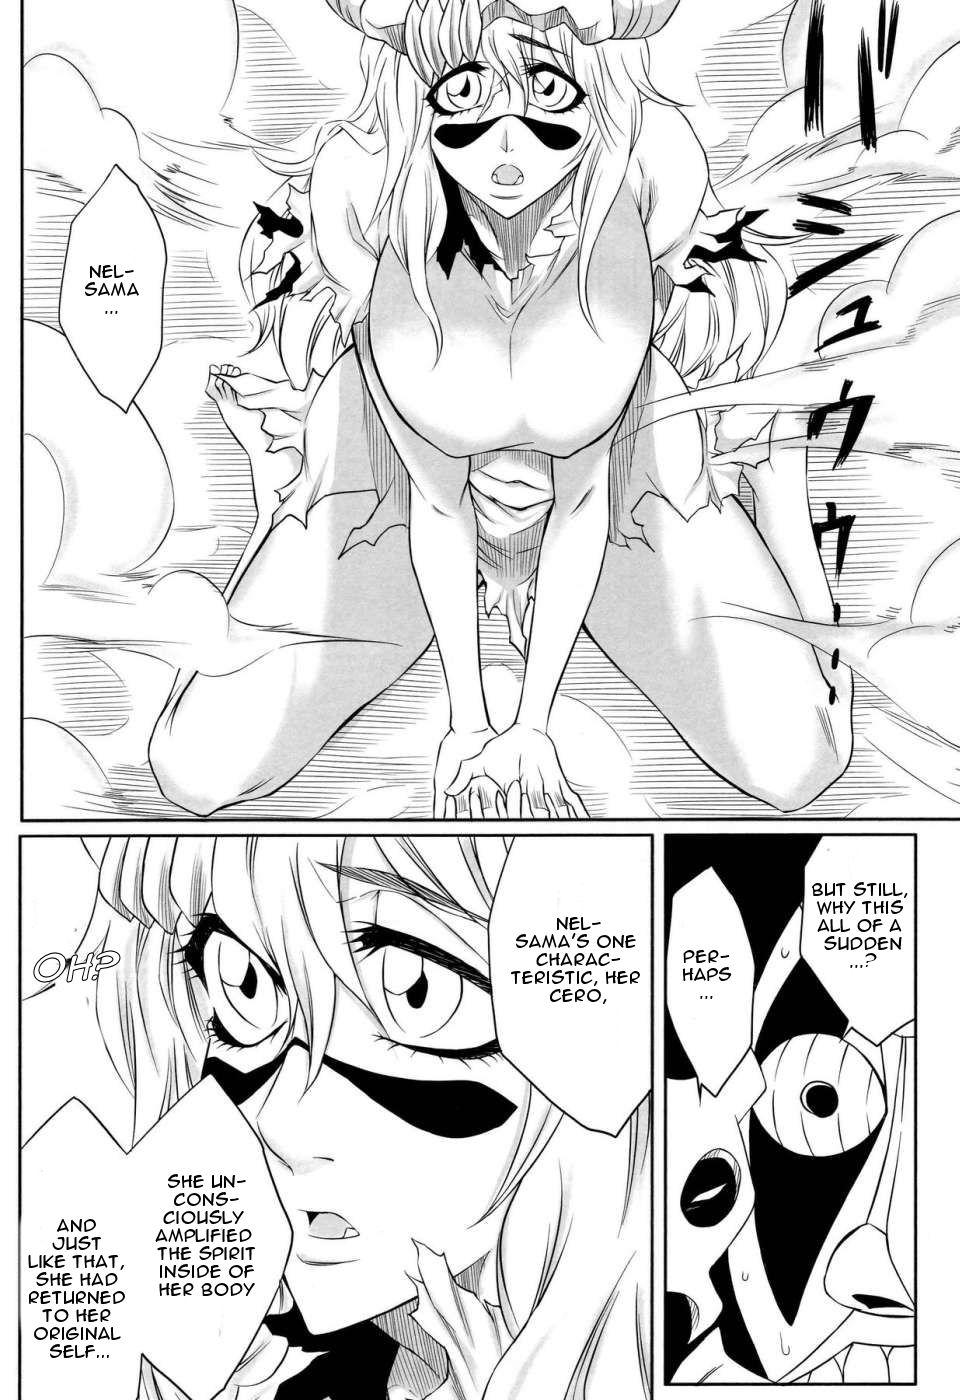 Shaved Nel - Bleach Italian - Page 5